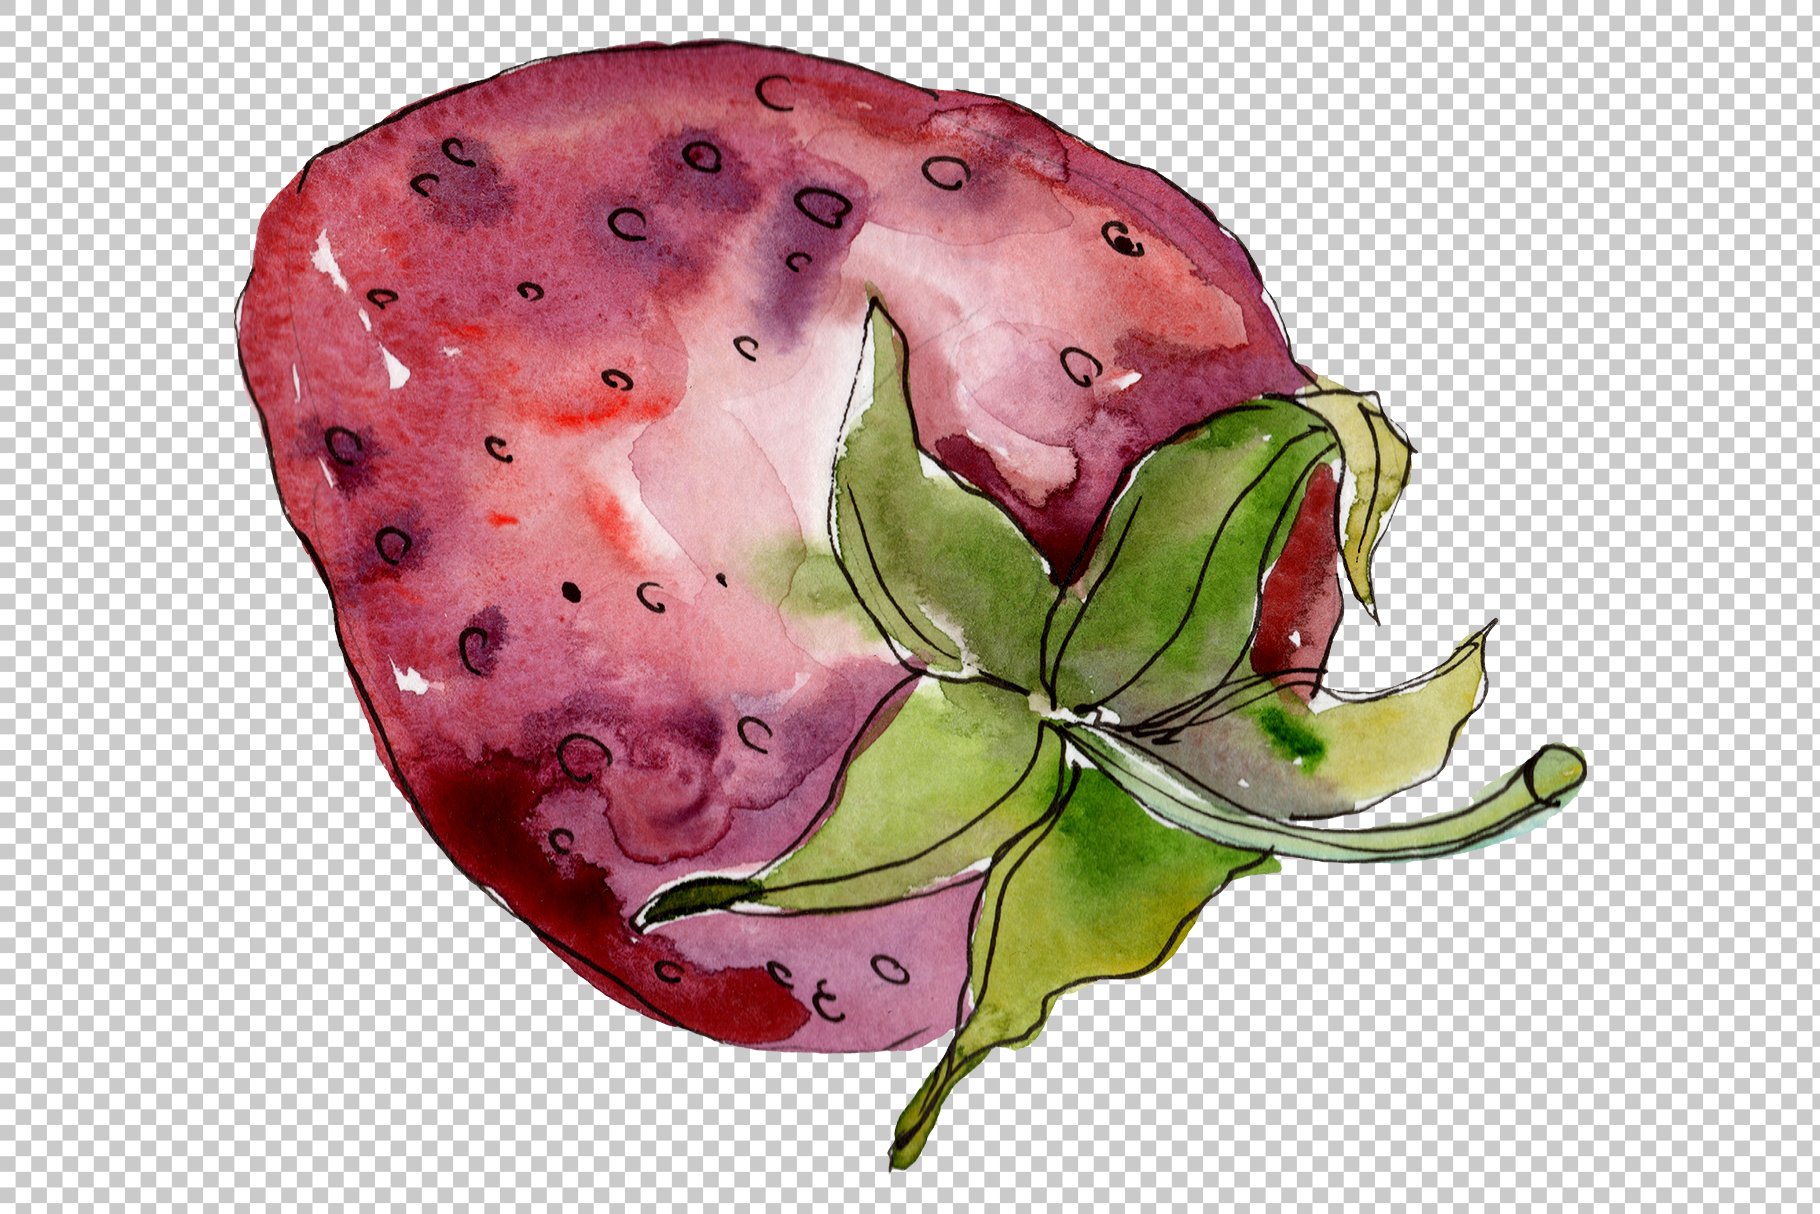 Watercolor old strawberry.